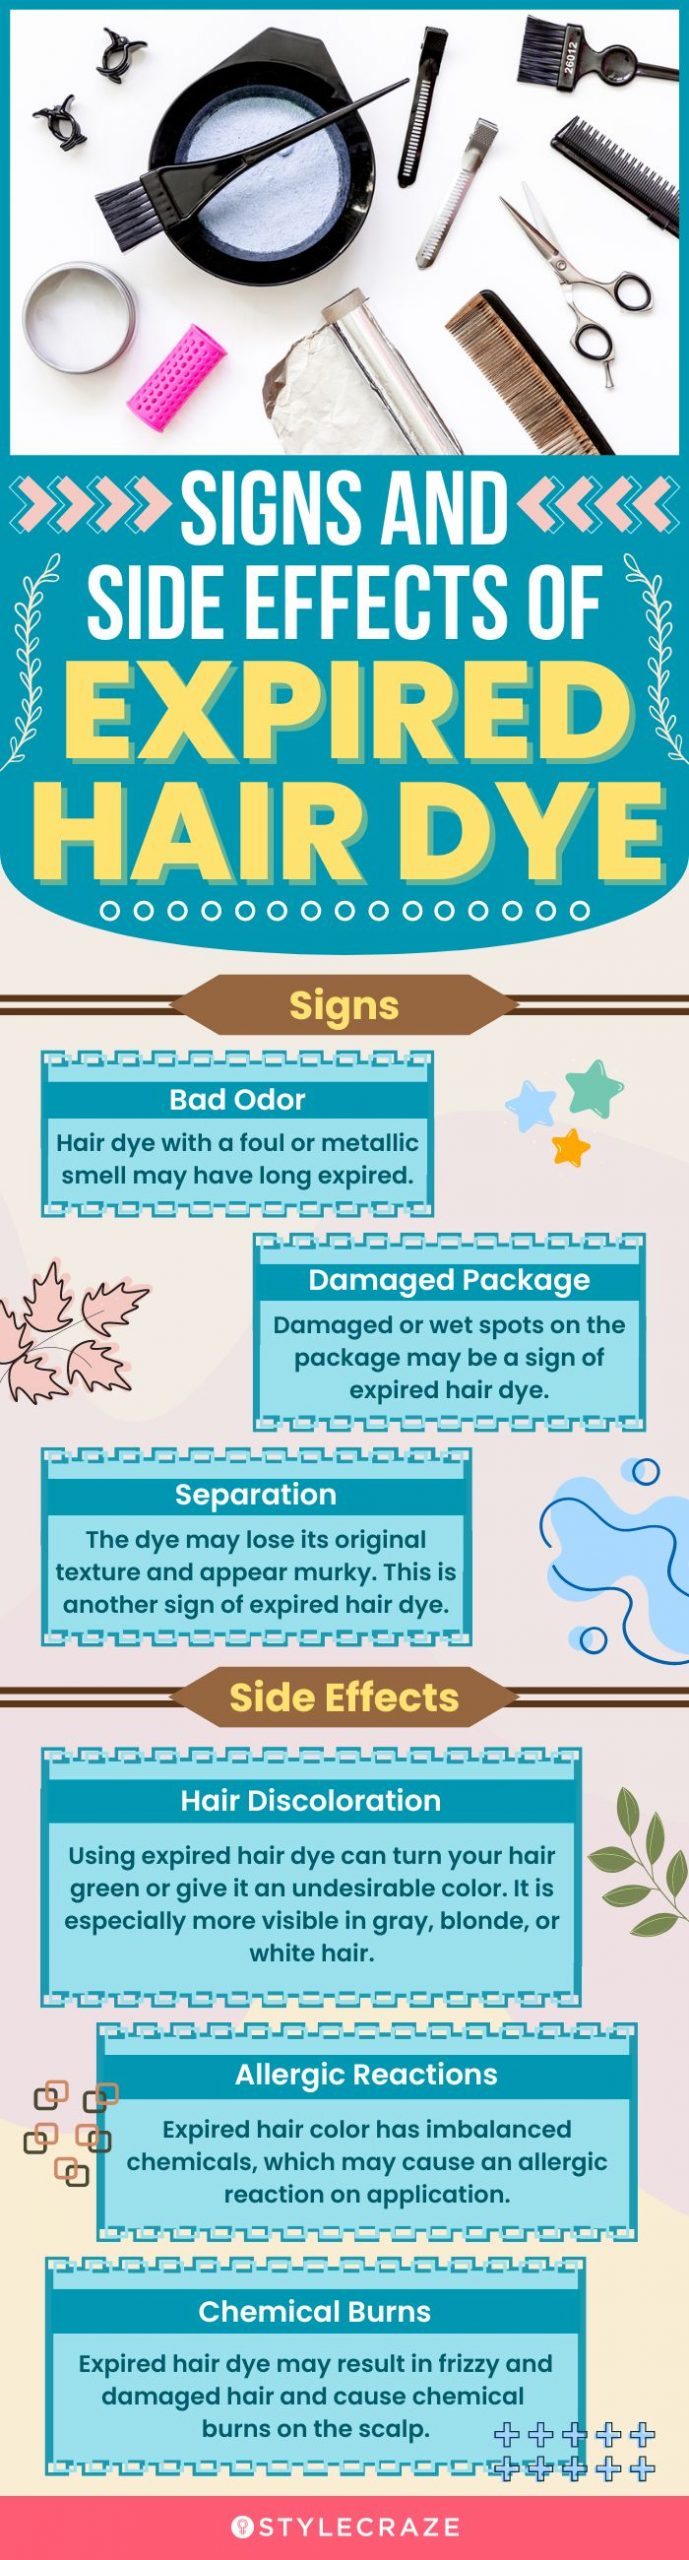 signs and results of using expired hair dye (infographic)